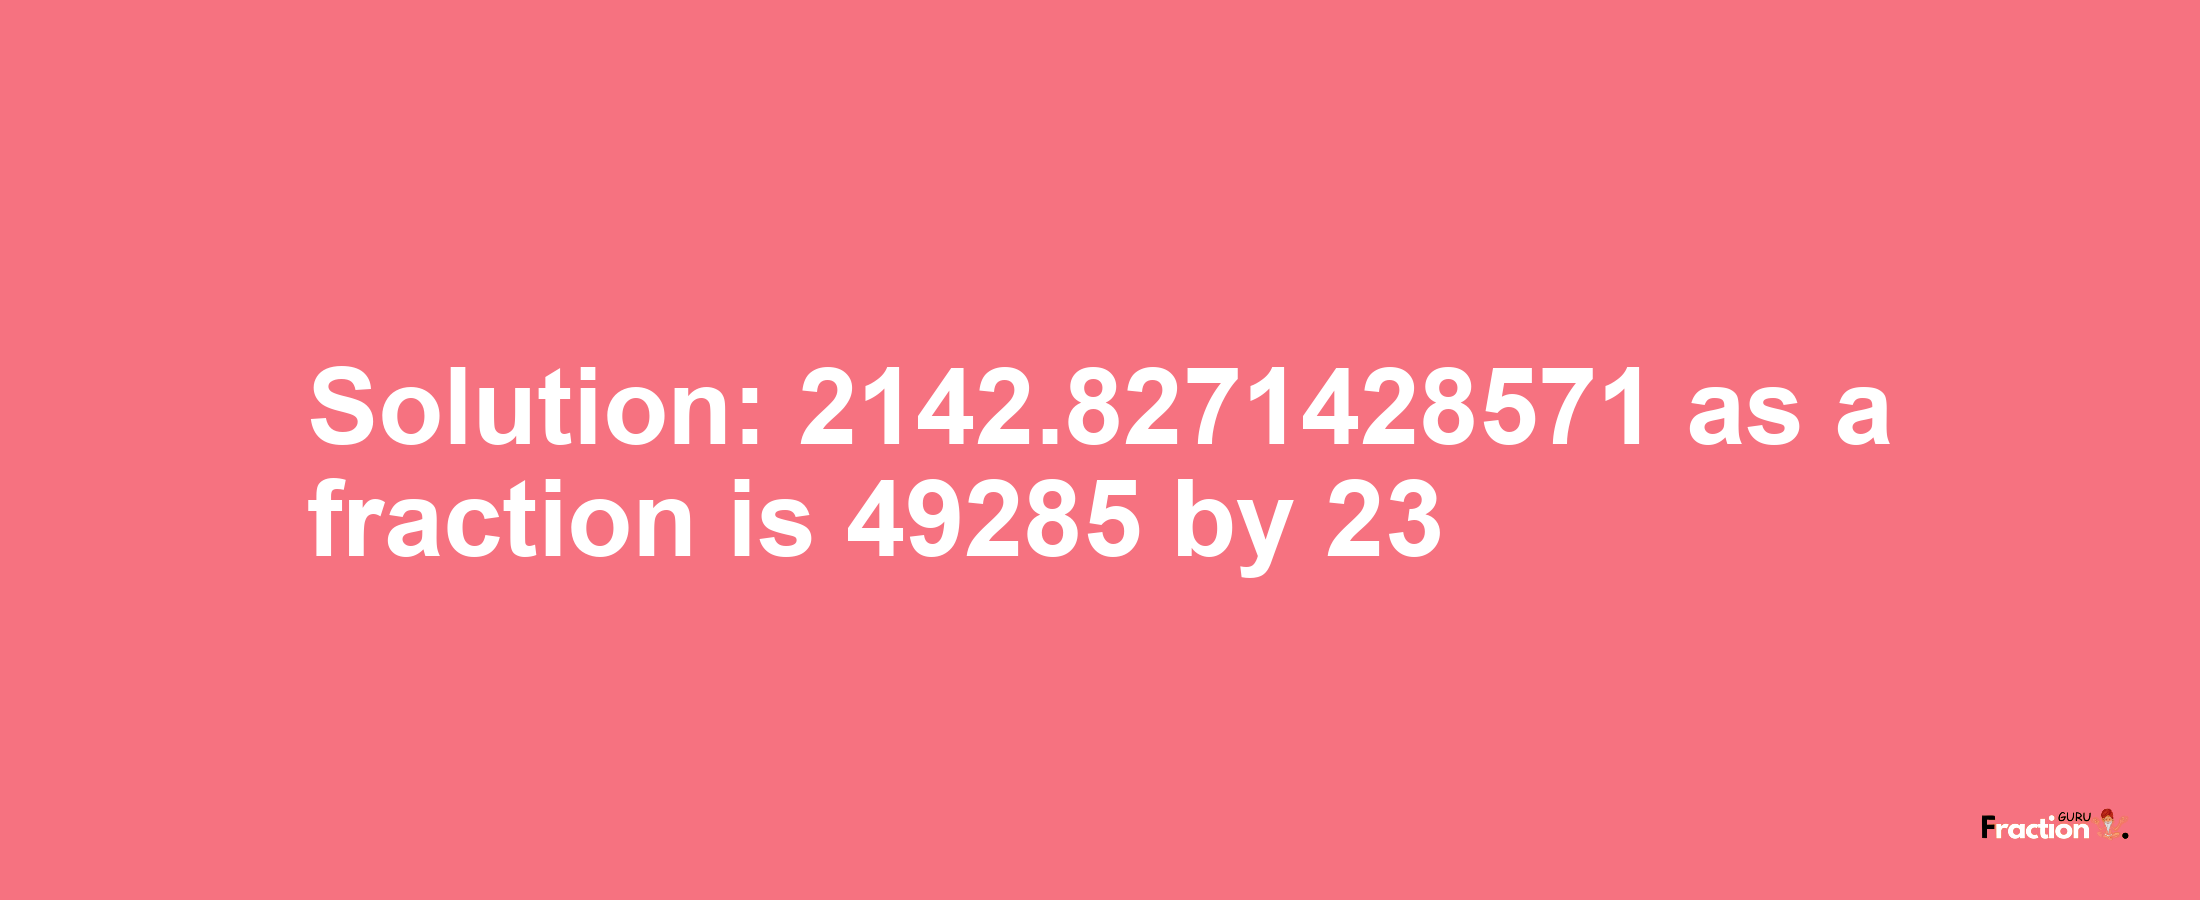 Solution:2142.8271428571 as a fraction is 49285/23